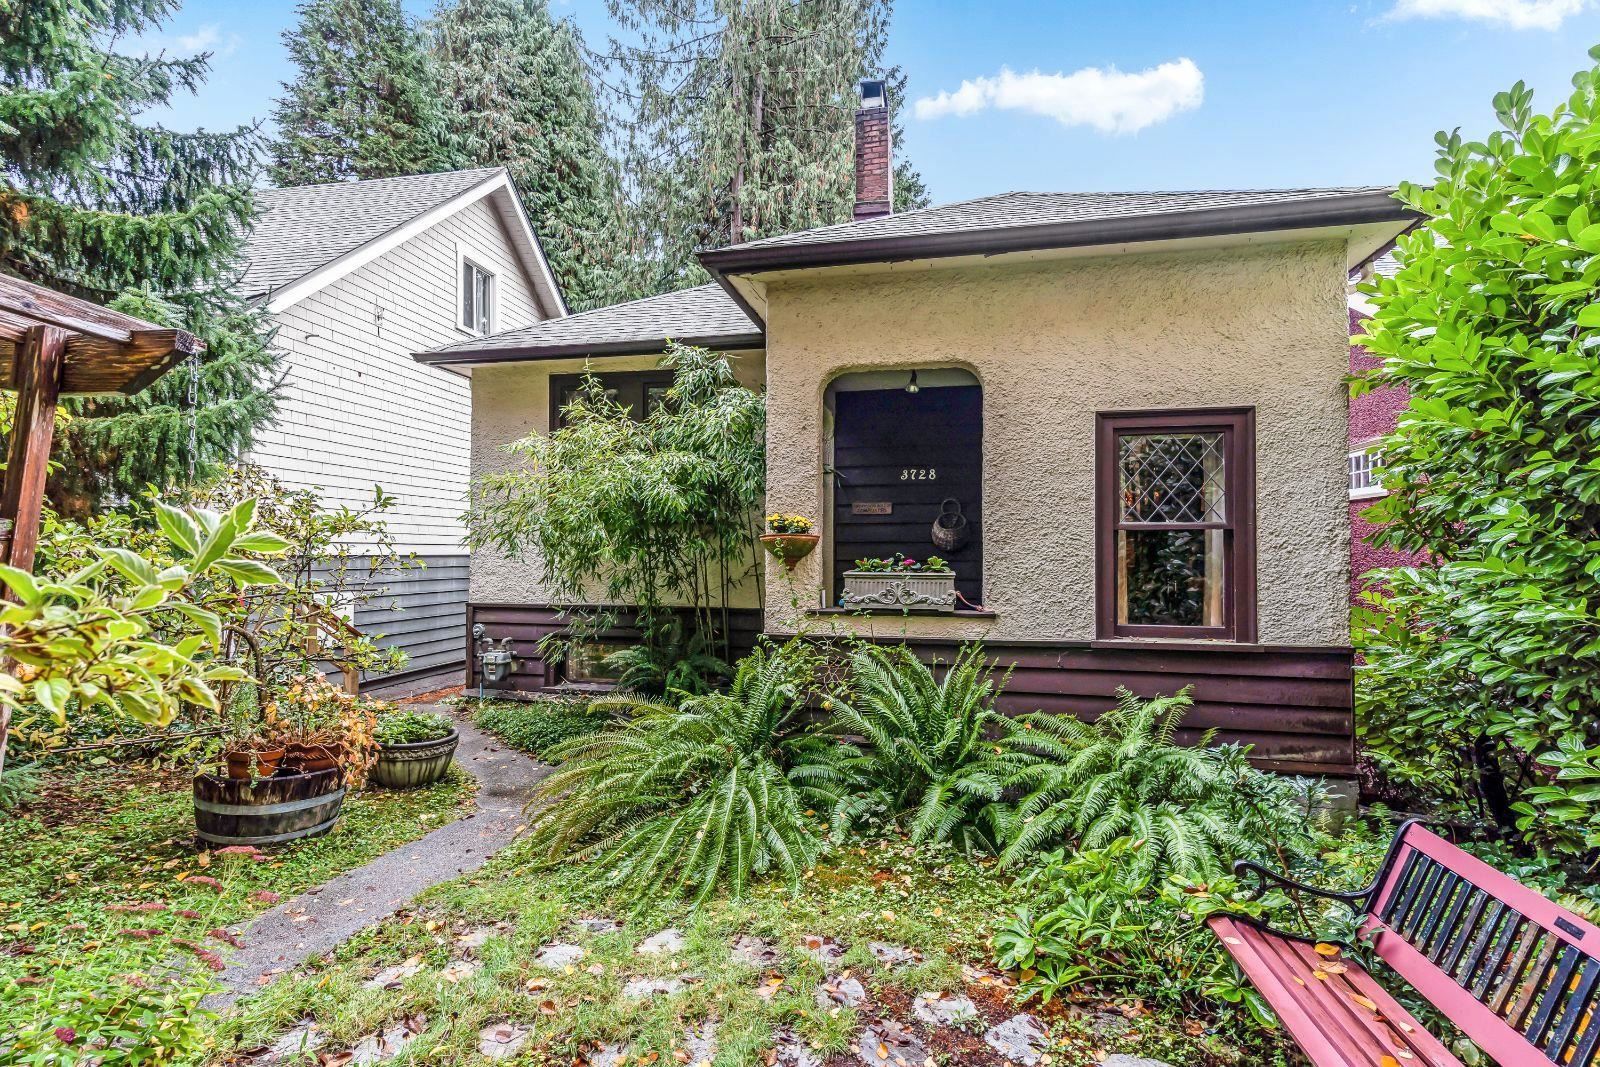 Main Photo: 3728 W 29th Avenue in Vancouver: Dunbar House  (Vancouver West)  : MLS®# R2628173